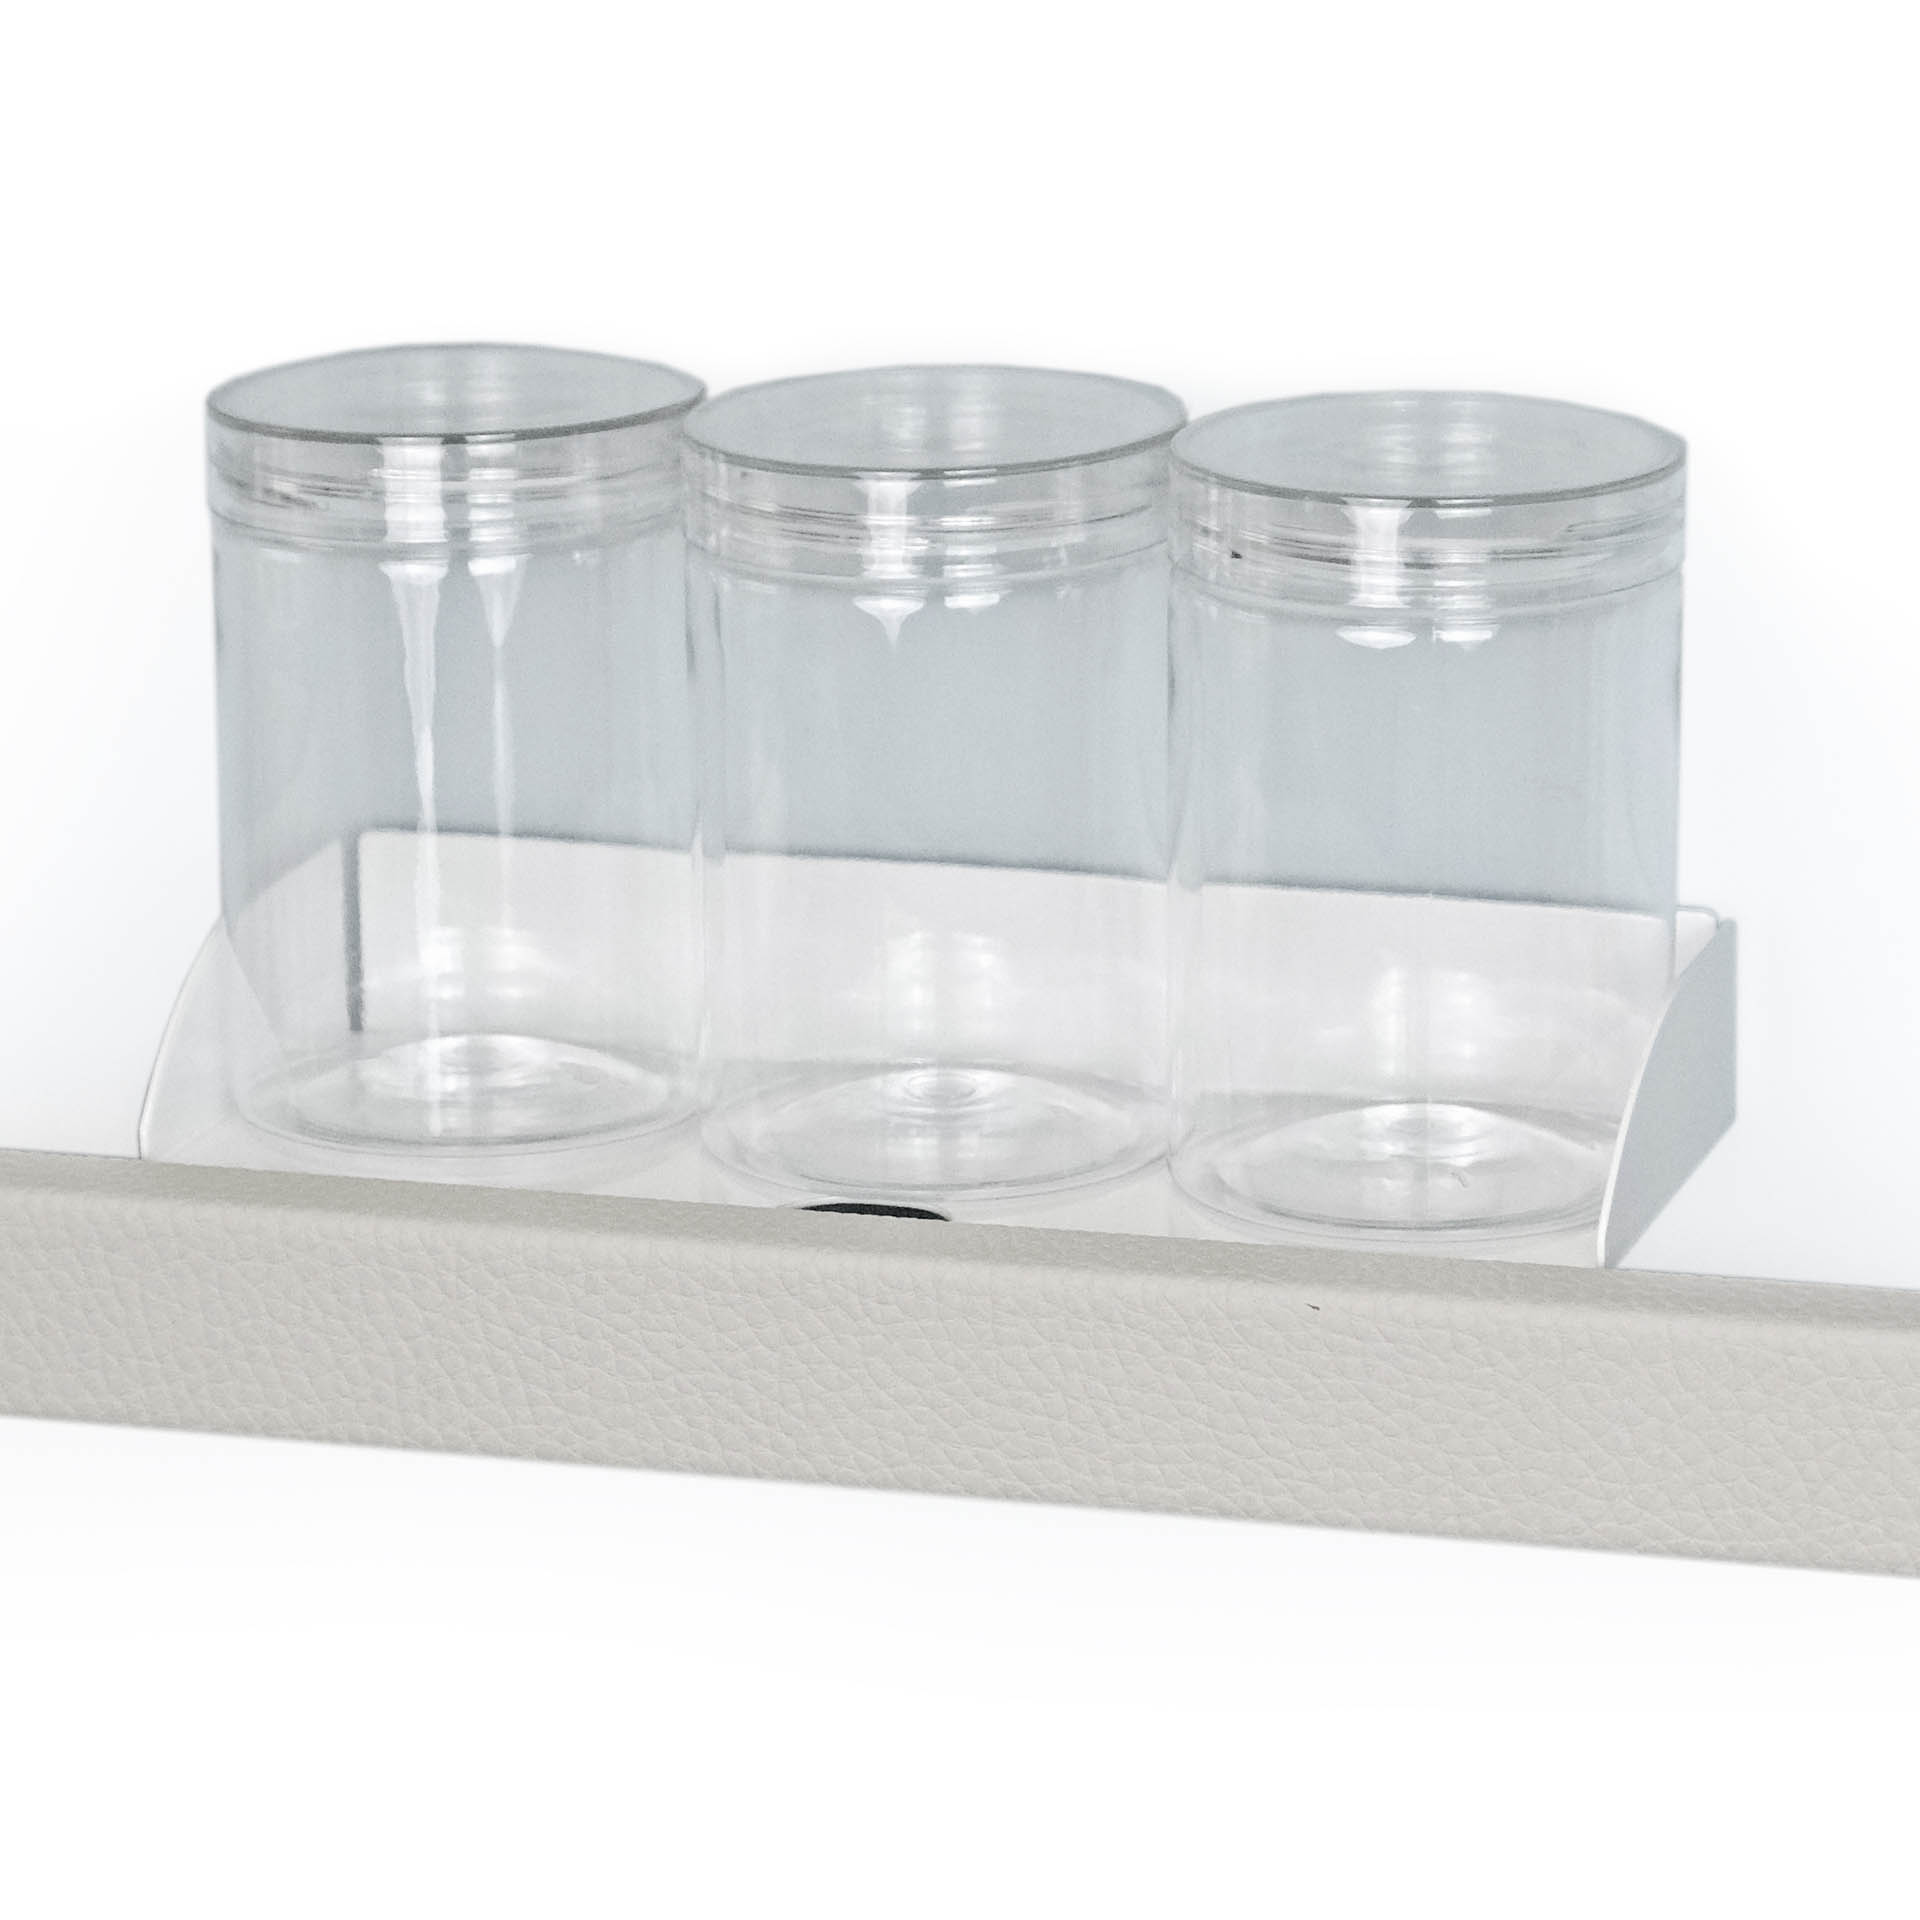 Symphony_container_0006_TAGHardware_SymphonyOffice_WH_Tray+Containers_Isolated.jpg